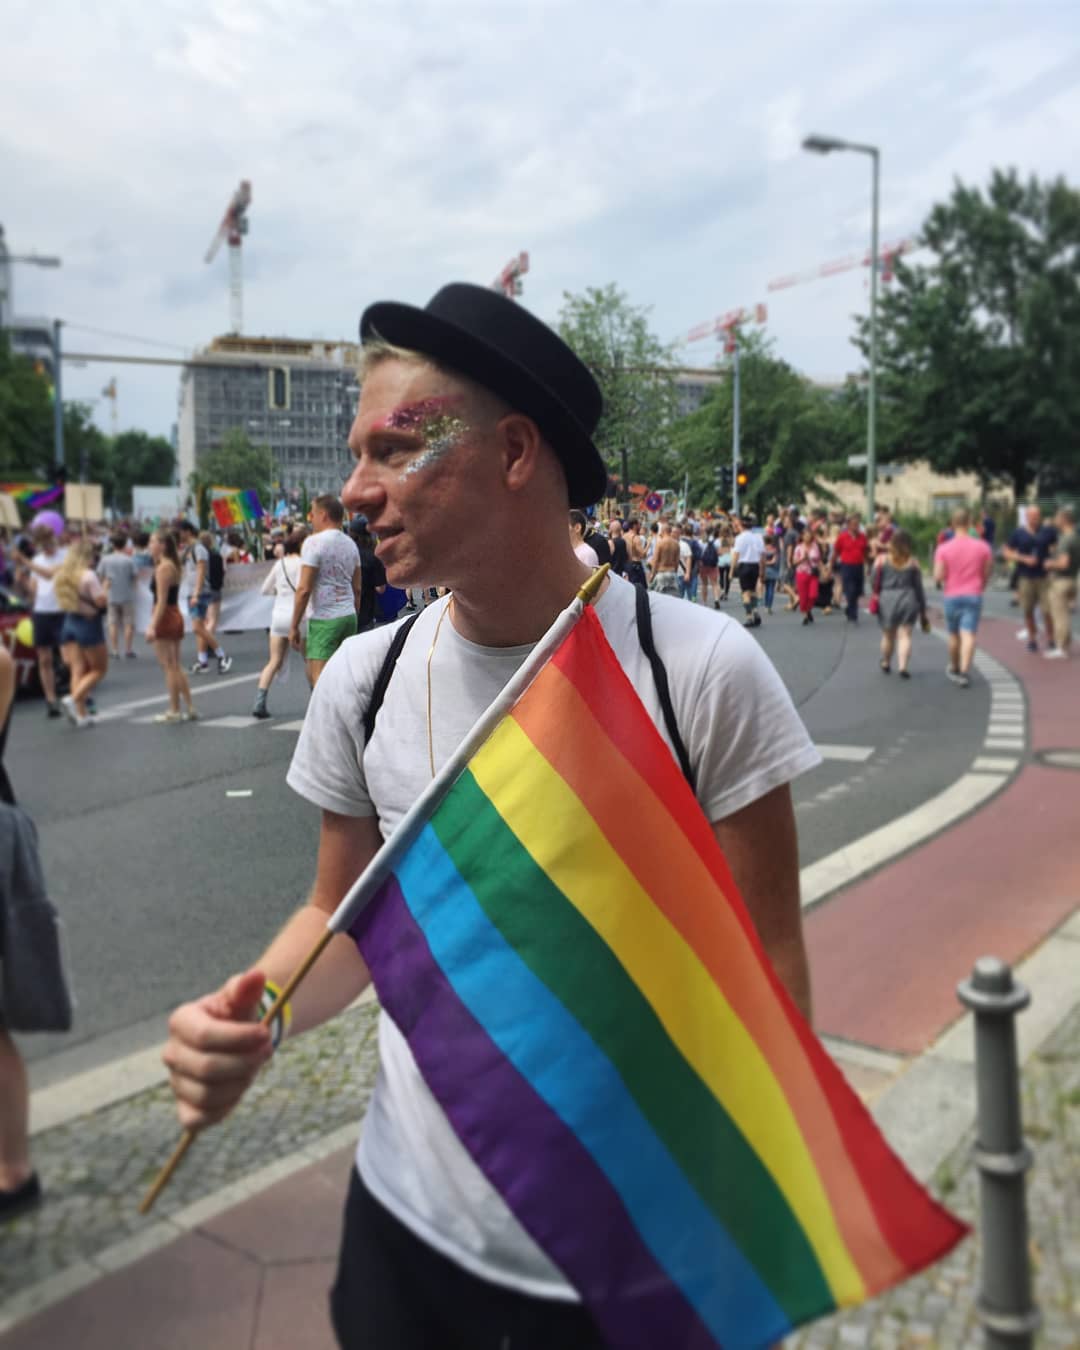 Guy wearing glitter and holding a rainbow flag. Photo by Instagram user @travelsofadam